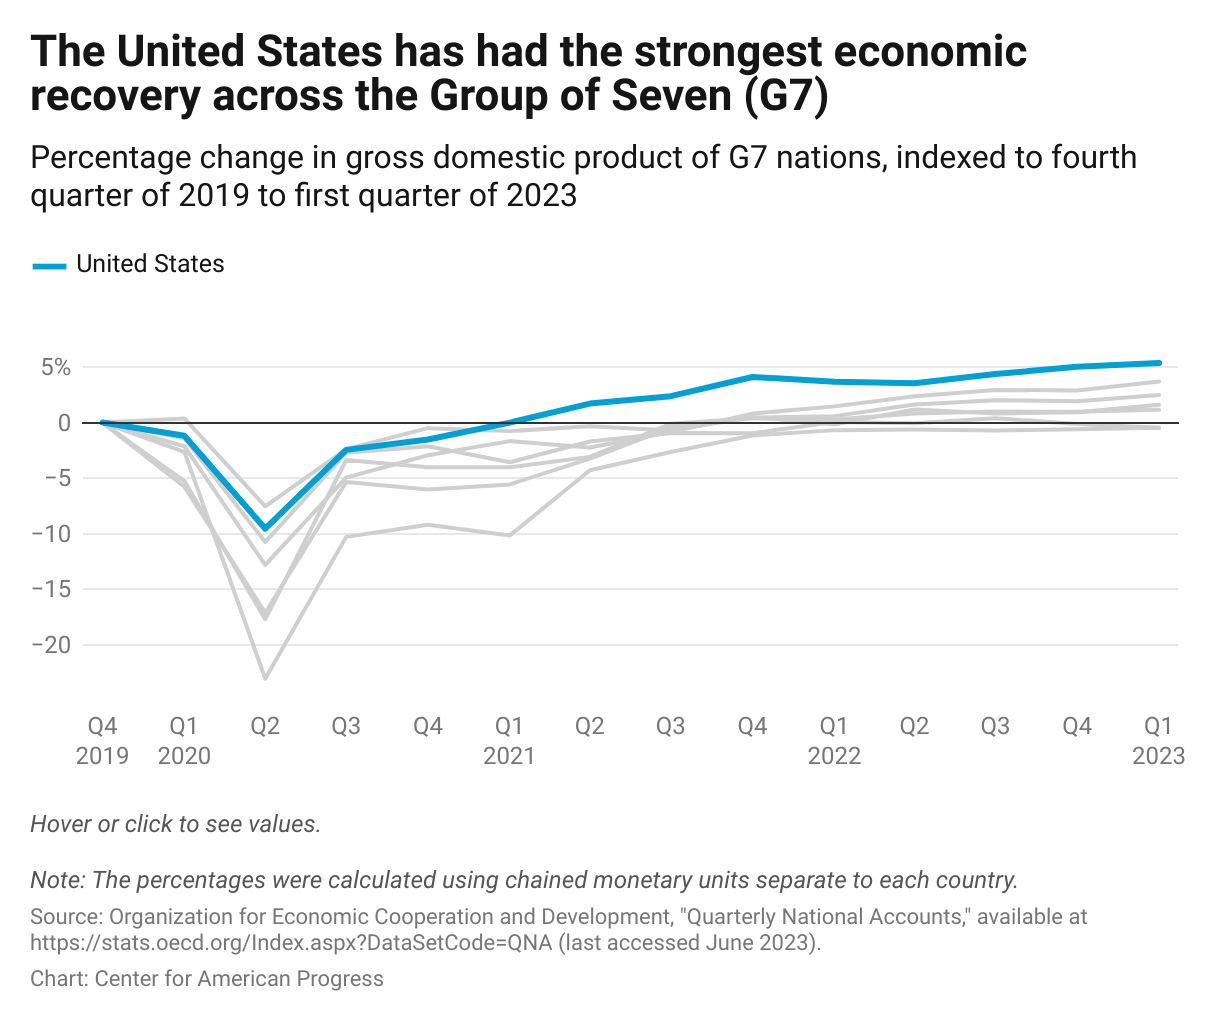 Line graph showing that the United States had a faster economic recovery than all other G7 countries.